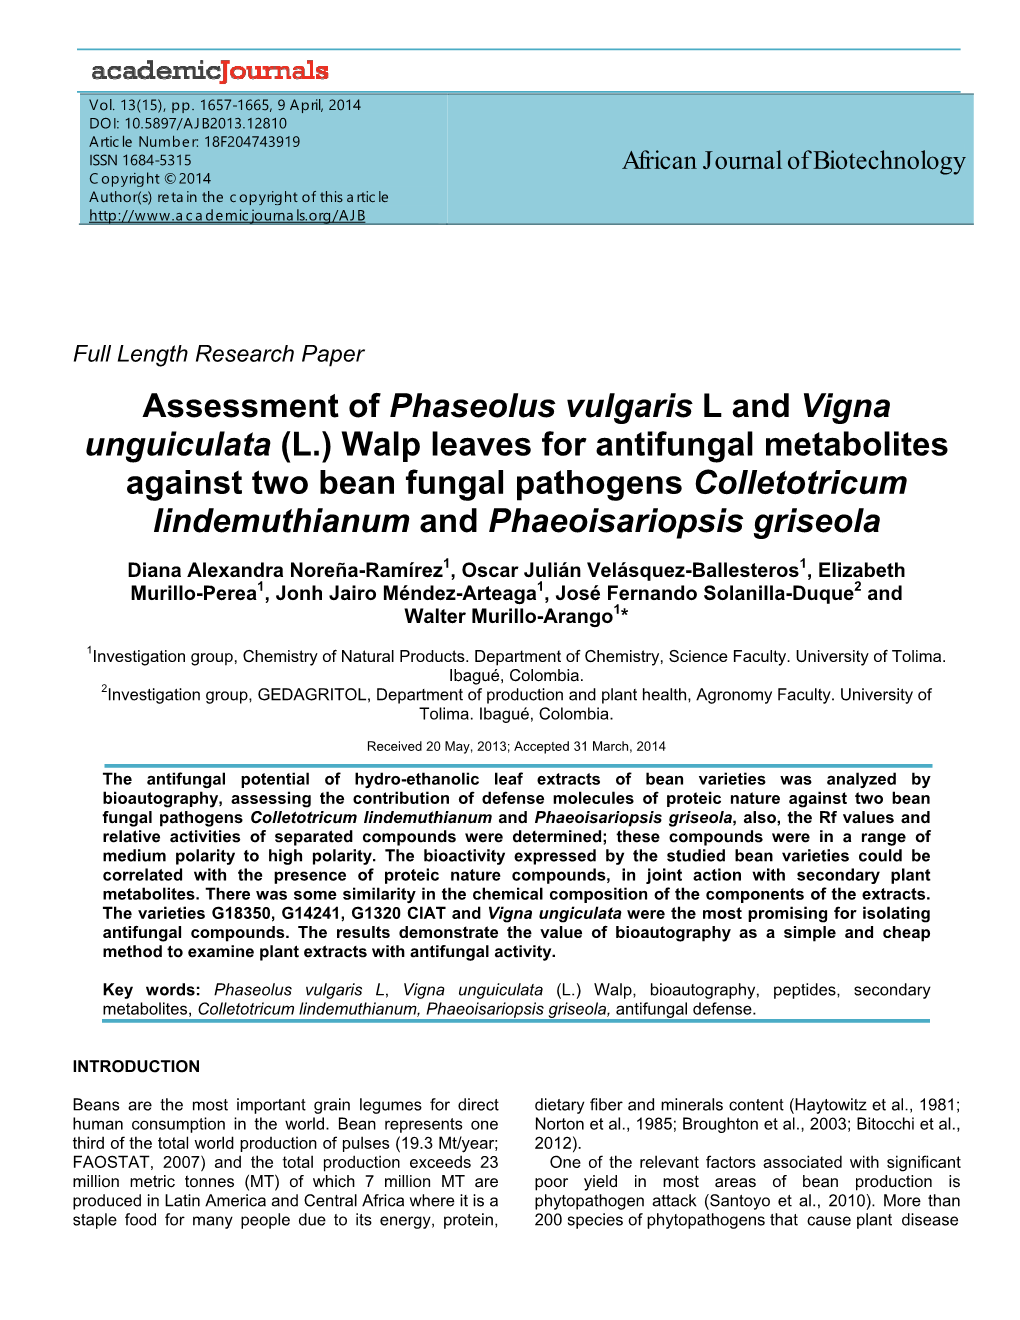 Assessment of Phaseolus Vulgaris L and Vigna Unguiculata (L.) Walp Leaves for Antifungal Metabolites Against Two Bean Fungal